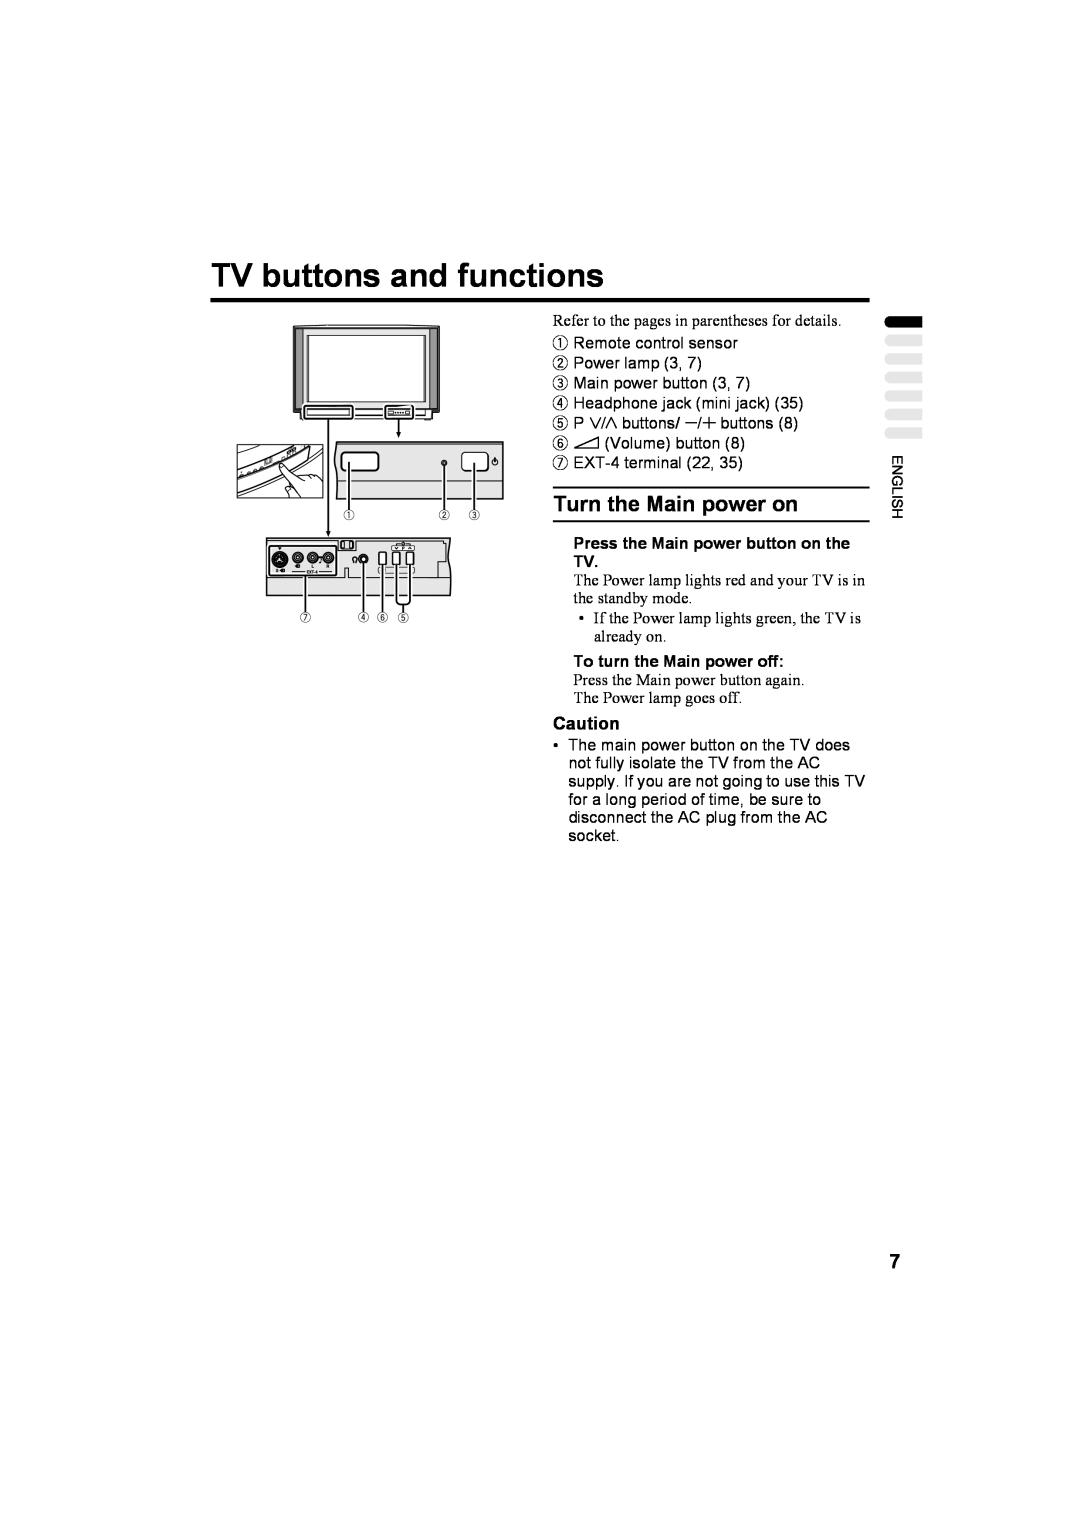 JVC AV32T20EP, AV28T20EP manual TV buttons and functions, Turn the Main power on, Press the Main power button on the TV 